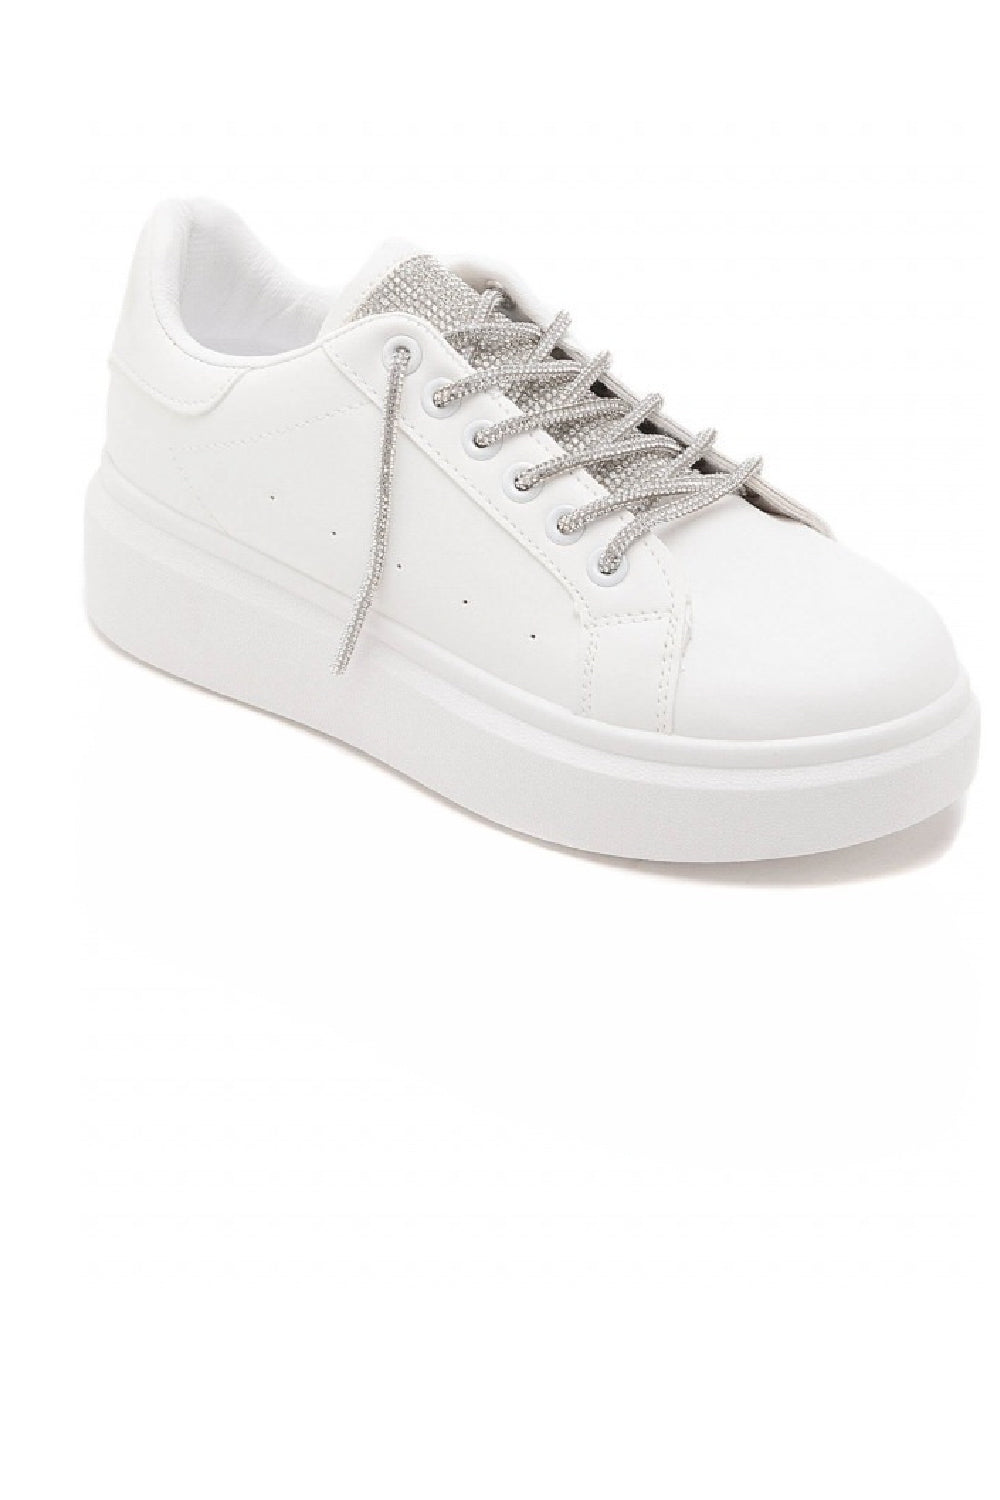 WHITE SPARKLY LACES FLAT LACE UP CHUNKY TRAINER SNEAKER